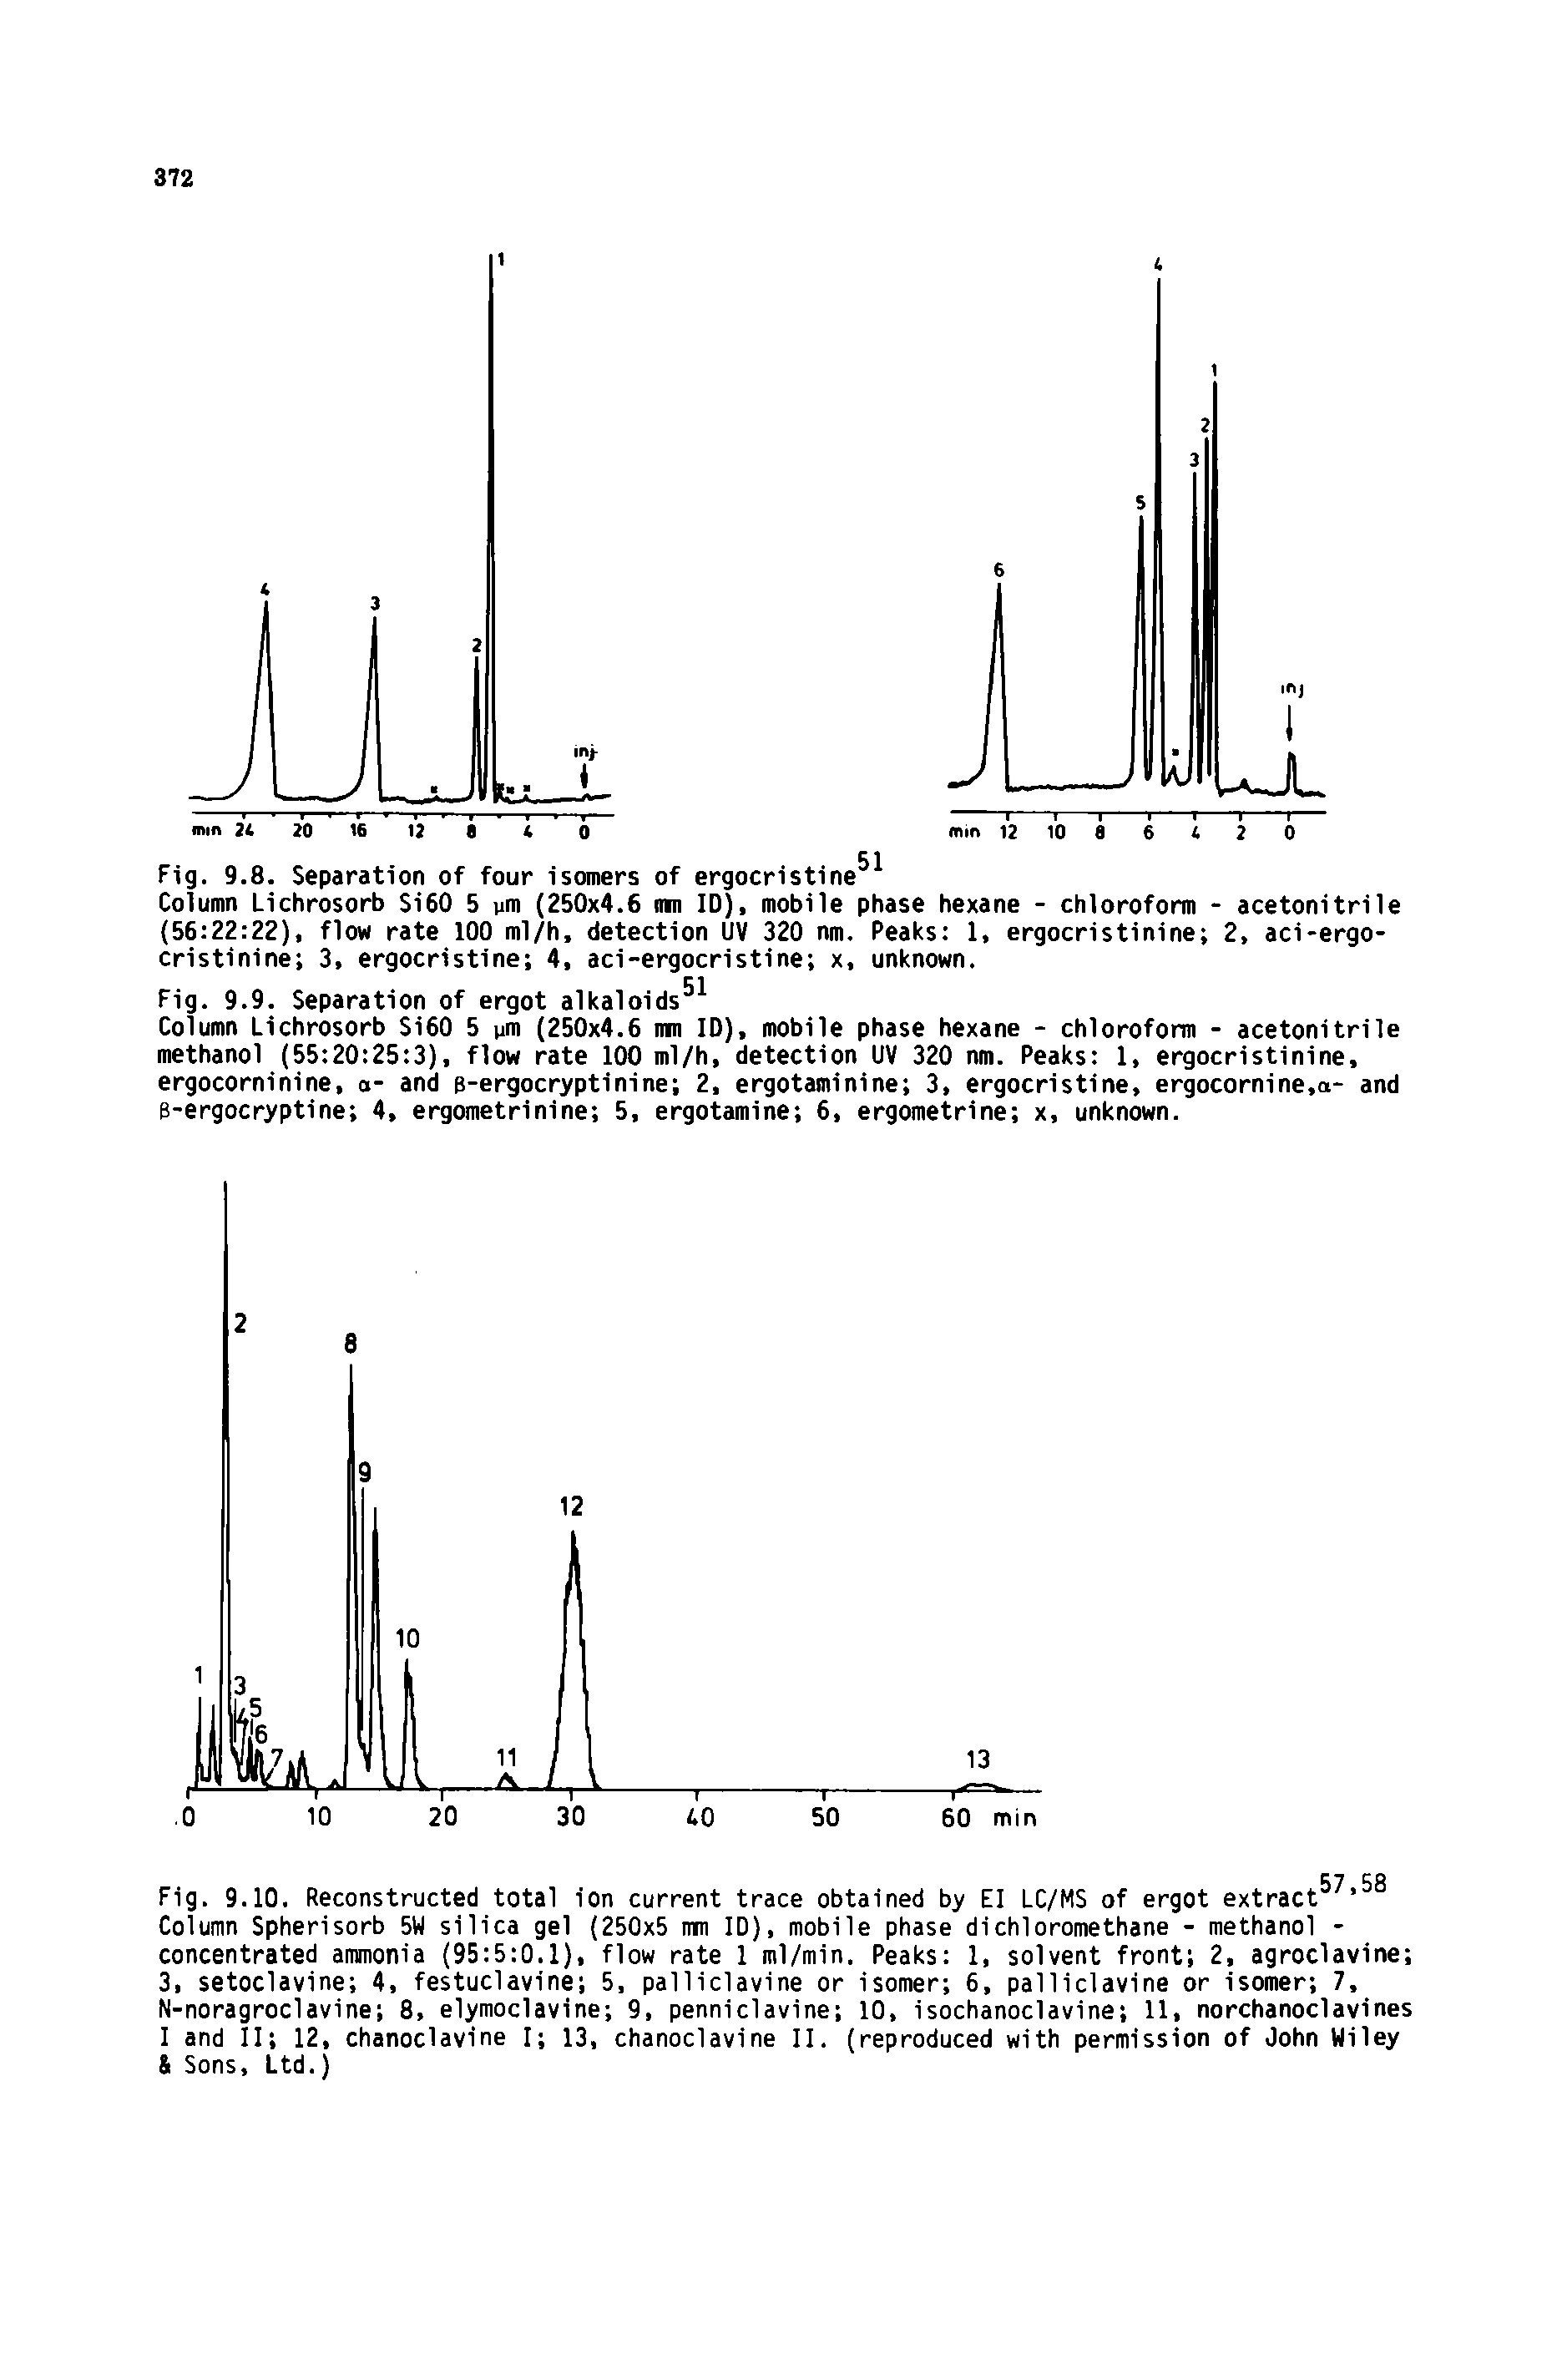 Fig. 9.10. Reconstructed total ion current trace obtained by El LC/MS of ergot extract Column Spherisorb 5W silica gel (250x5 nm ID), mobile phase dichloromethane - methanol -concentrated ammonia (95 5 0.1), flow rate 1 ml/min. Peaks 1, solvent front 2, agroclavine 3, setoclavine 4, festuclavine 5, pal 1iclavine or isomer 6, pal 1iclavine or isomer 7, N-noragroclavine 8, elymoclavine 9, penniclavine 10, isochanoclavine 11, norchanoclavines I and II 12, chanoclavine I 13, chanoclavine II. (reproduced with permission of John Wiley Sons, Ltd.)...